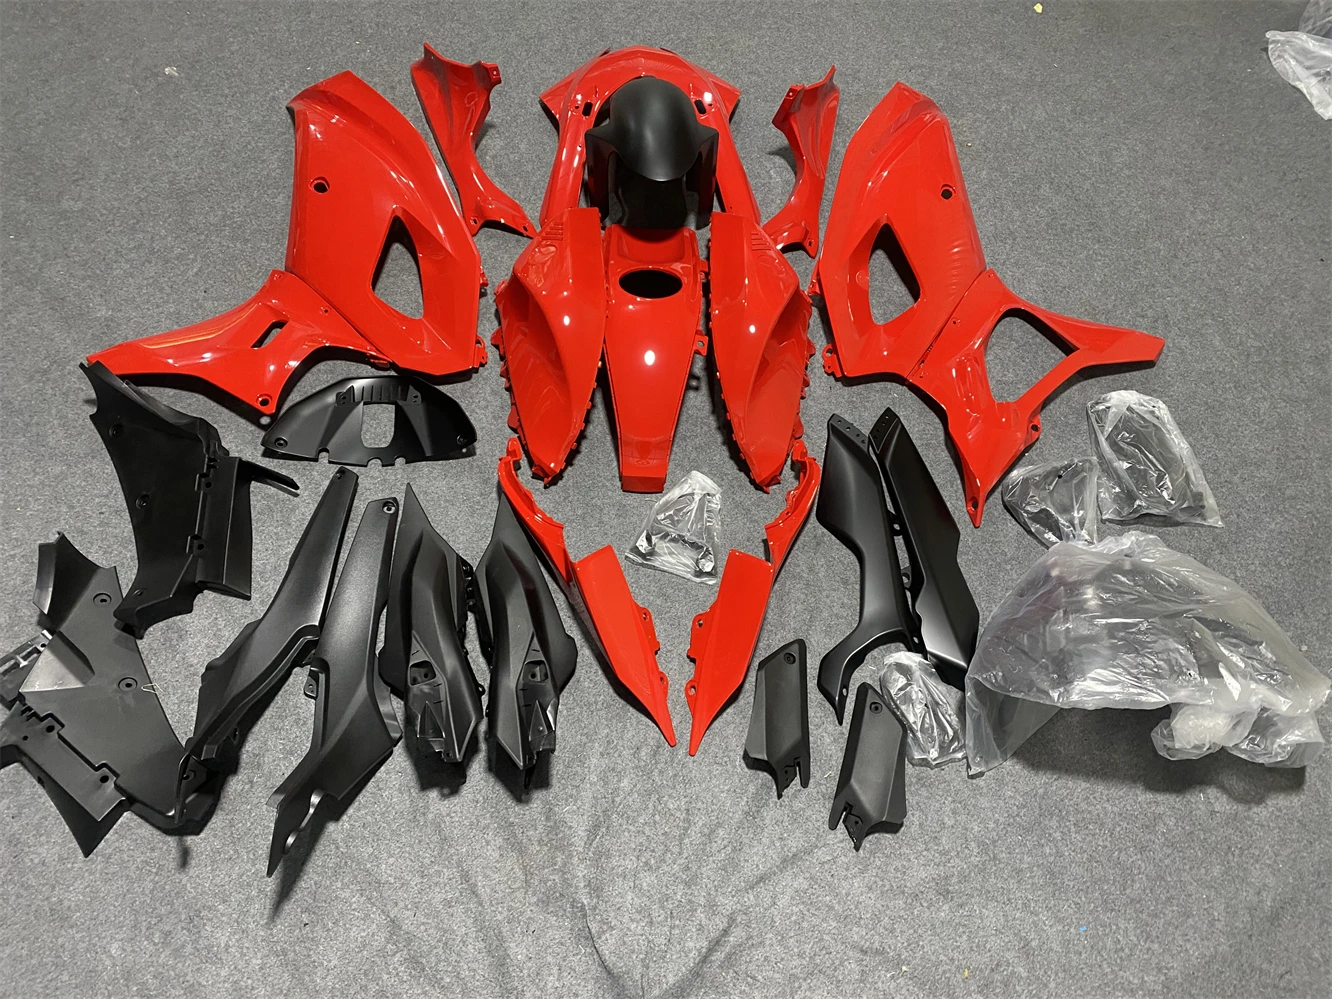 100% Injection Motorcycle Fairing kit for Yamaha R7 2022 2023 YZF700 22 23 Year fairing Red Black body rebuild ABS Plastic motorcycle parts